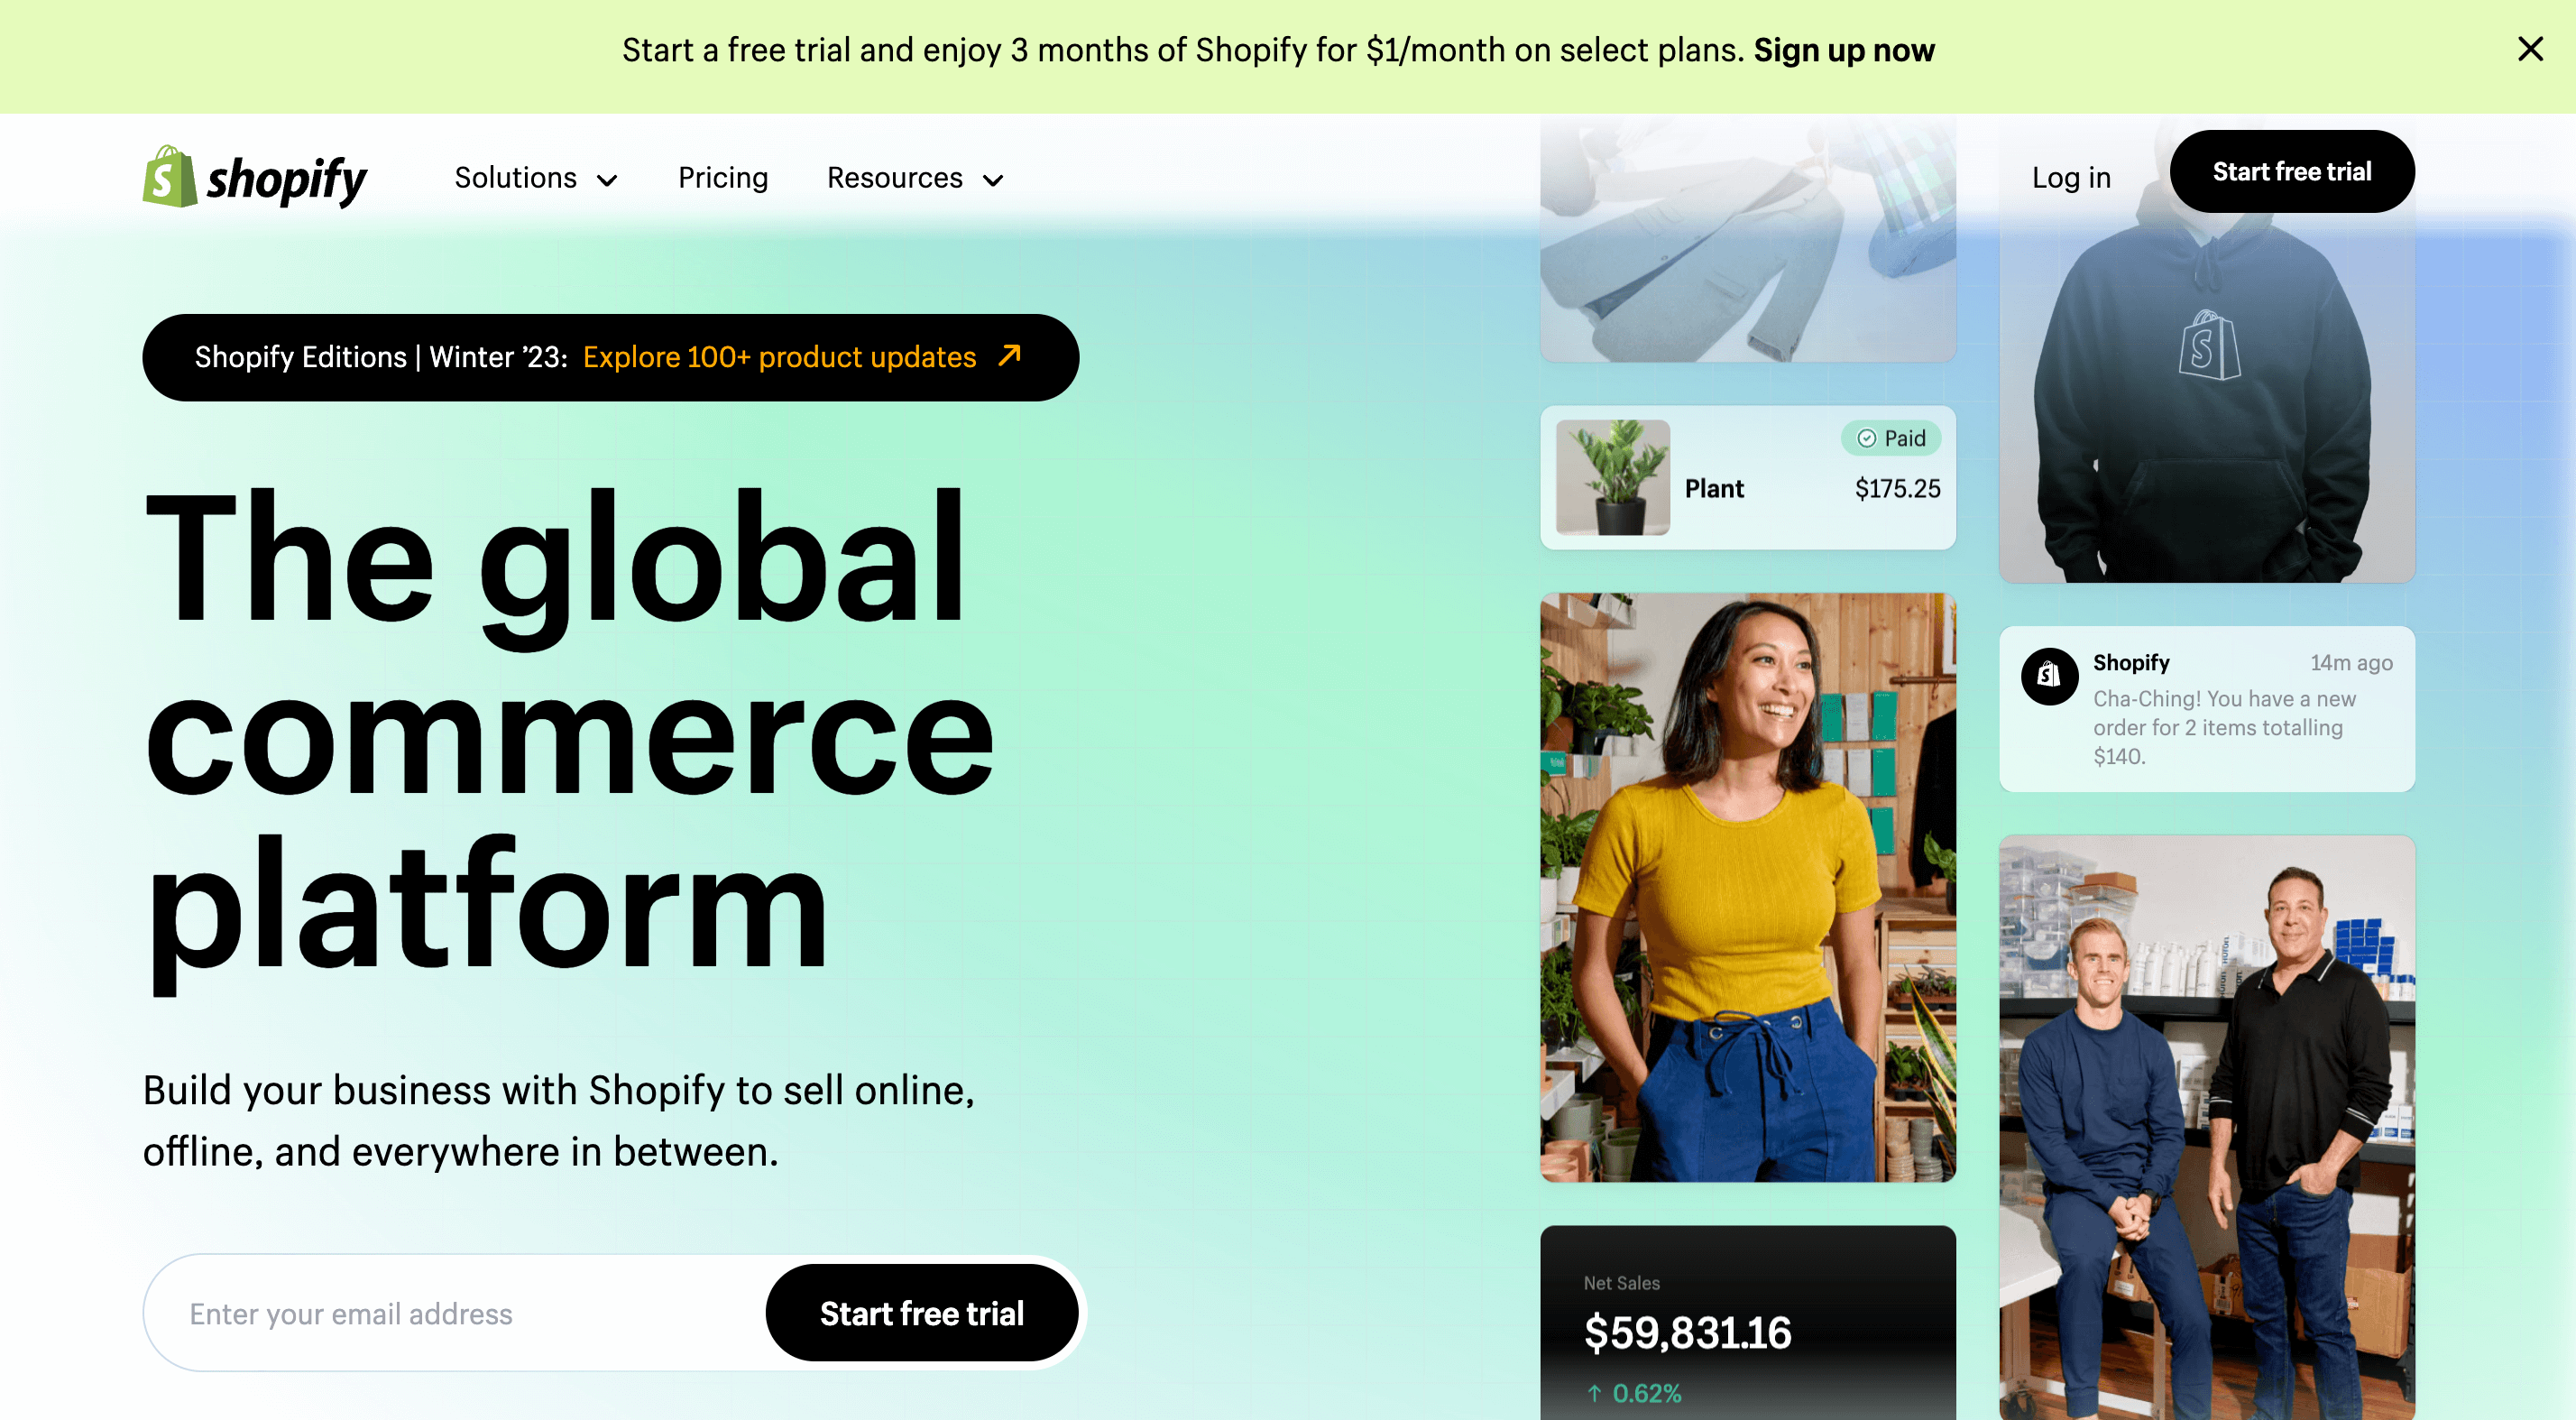 Shopifys home page and trial